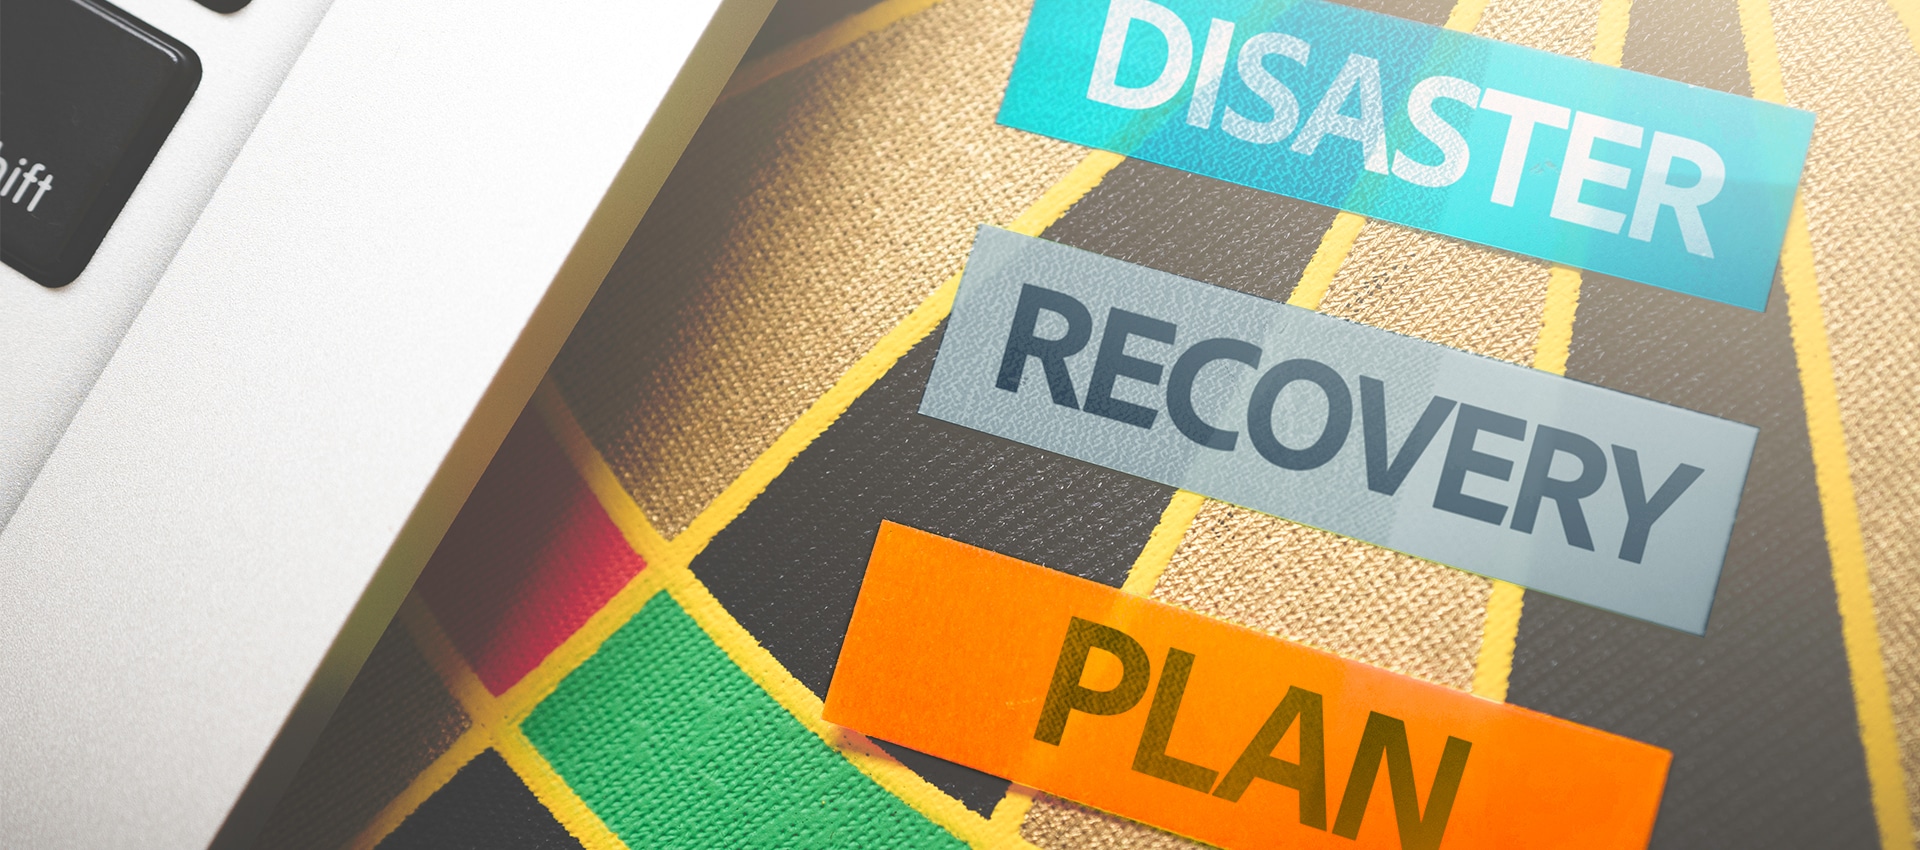 Disaster recovery plan graphic